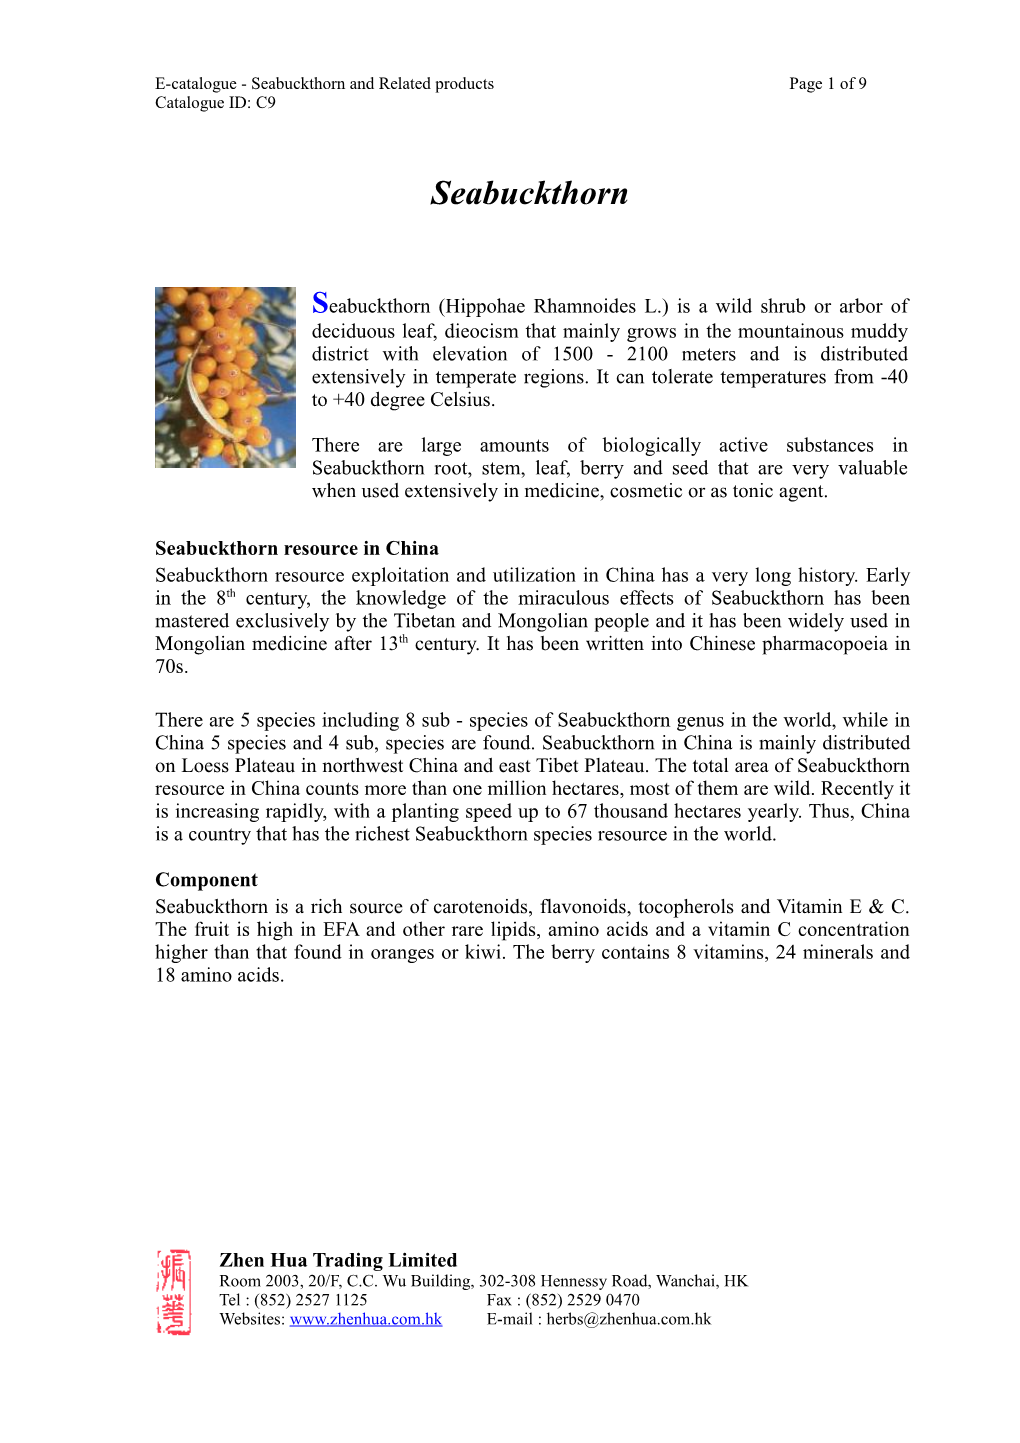 E-Catalogue - Seabuckthorn and Related Products Page 8 of 9